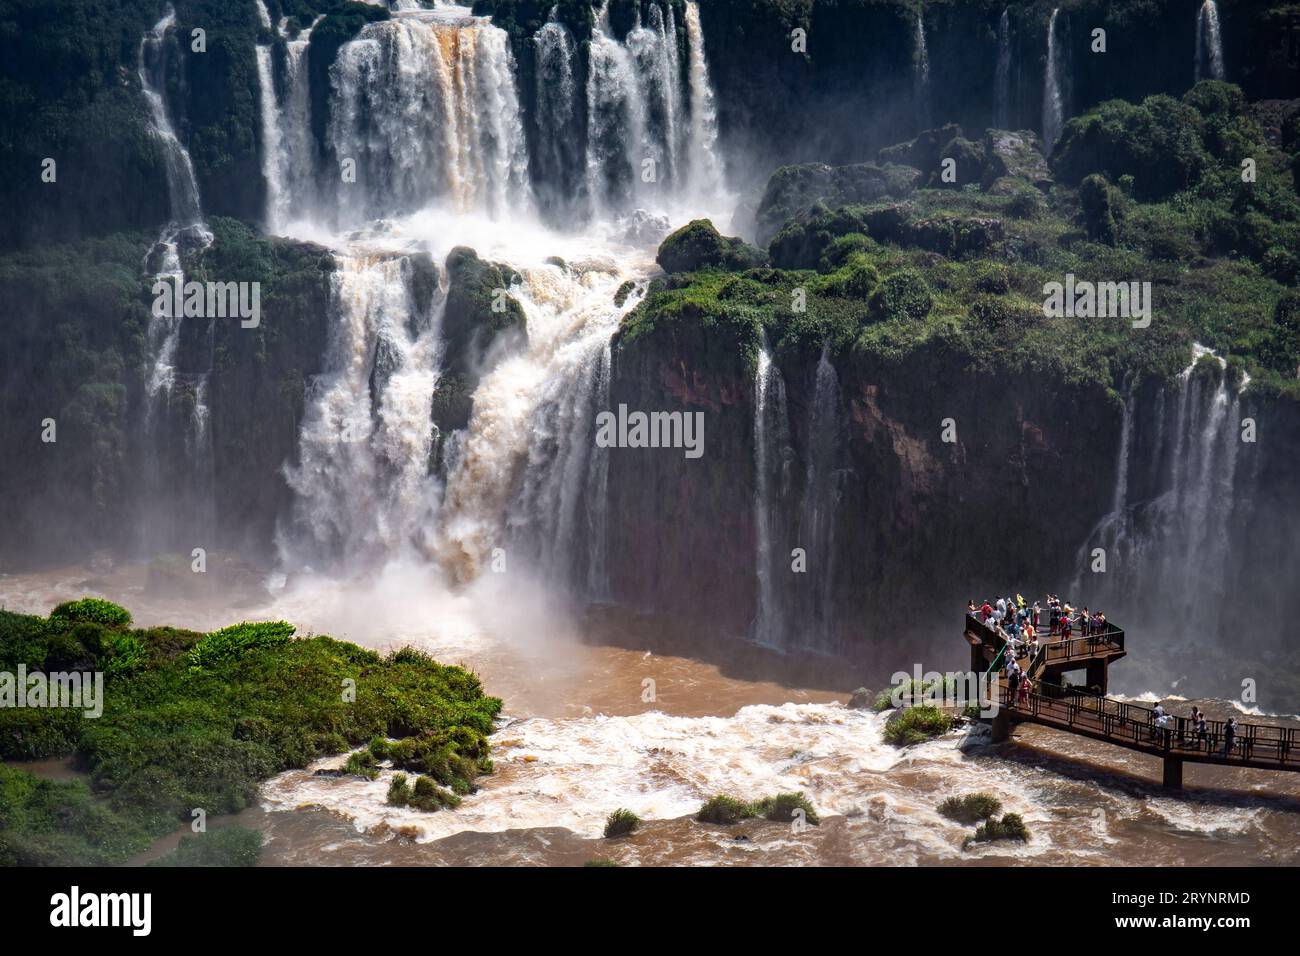 Close-up view to spectacular waterfalls with lush green vegetation and a visitor platform, Iguazu Fa Stock Photo